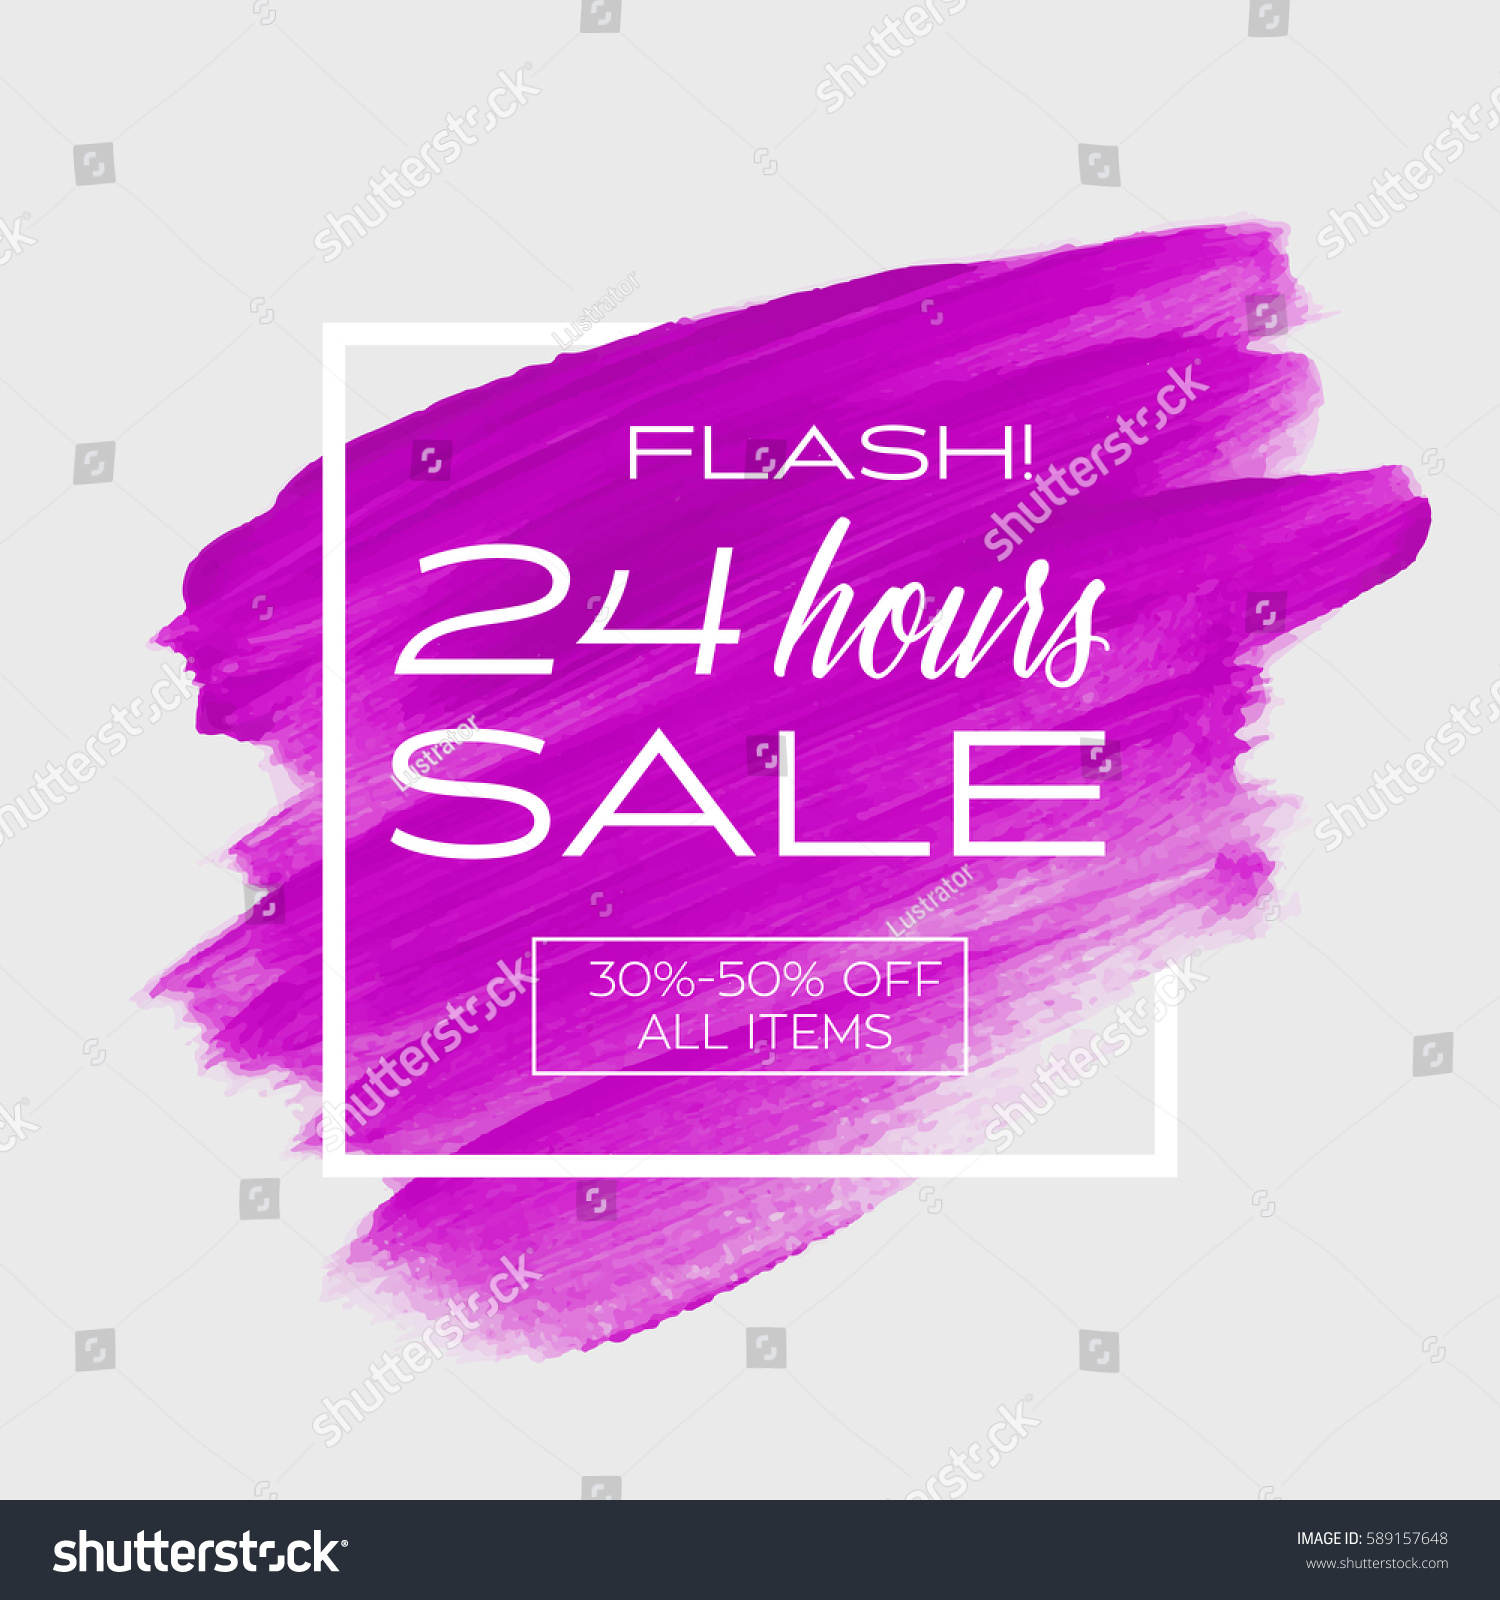 SVG of Sale special '24 hours' sign over art brush acrylic stroke paint abstract texture background vector illustration. Perfect watercolor design for a shop and sale banners. svg